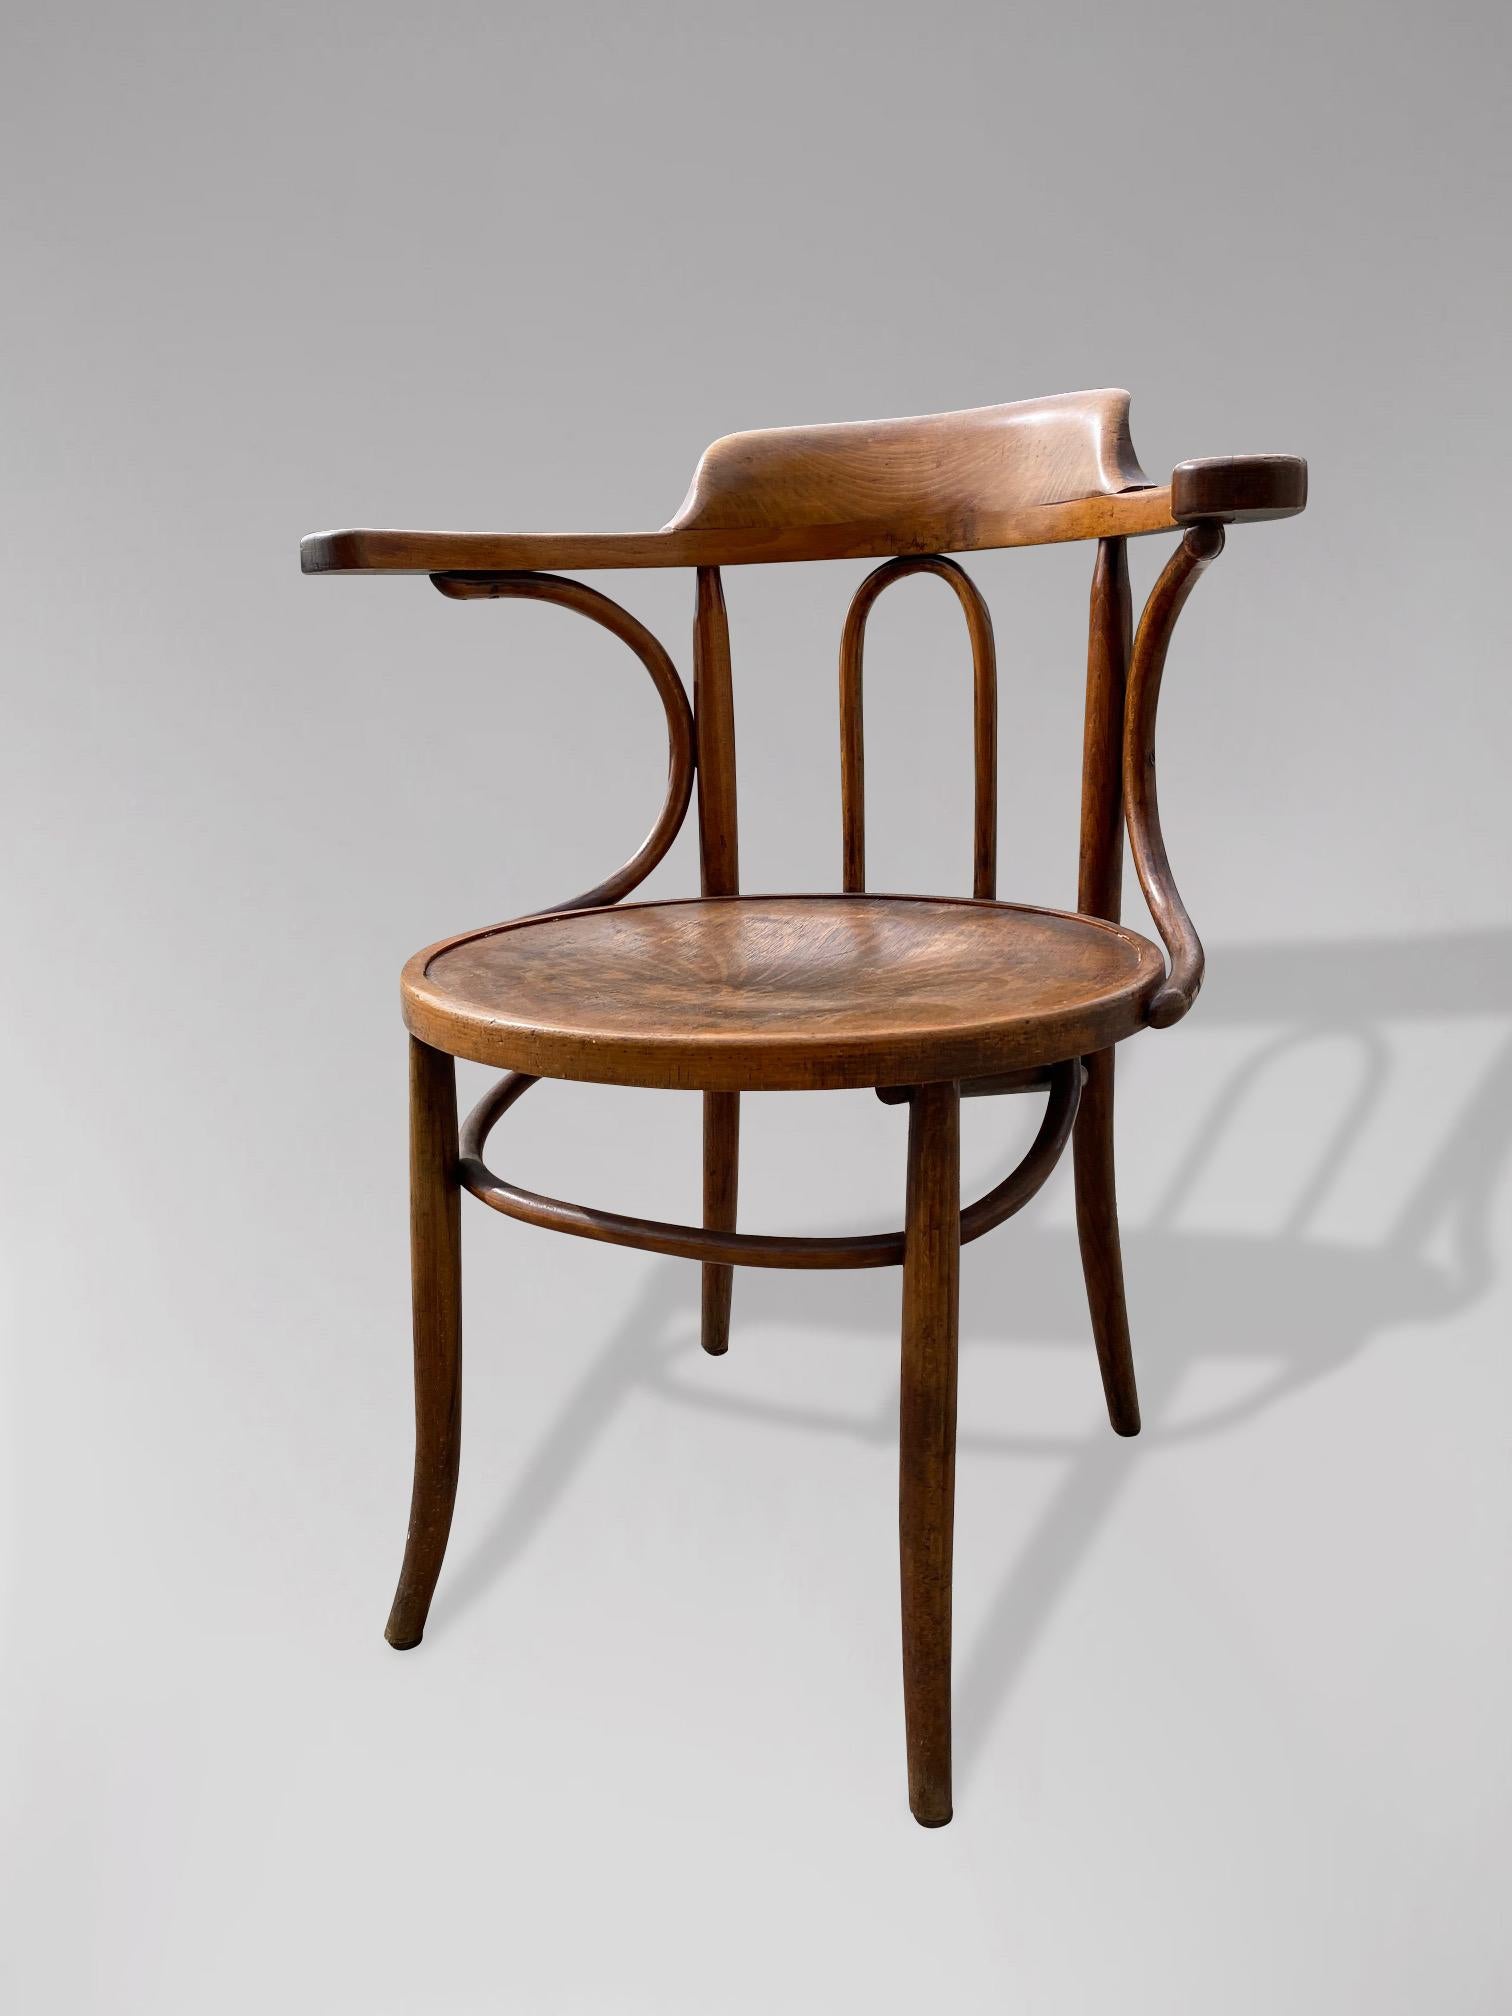 French Art Nouveau Period Bentwood Armchair by Thonet In Good Condition For Sale In Petworth,West Sussex, GB